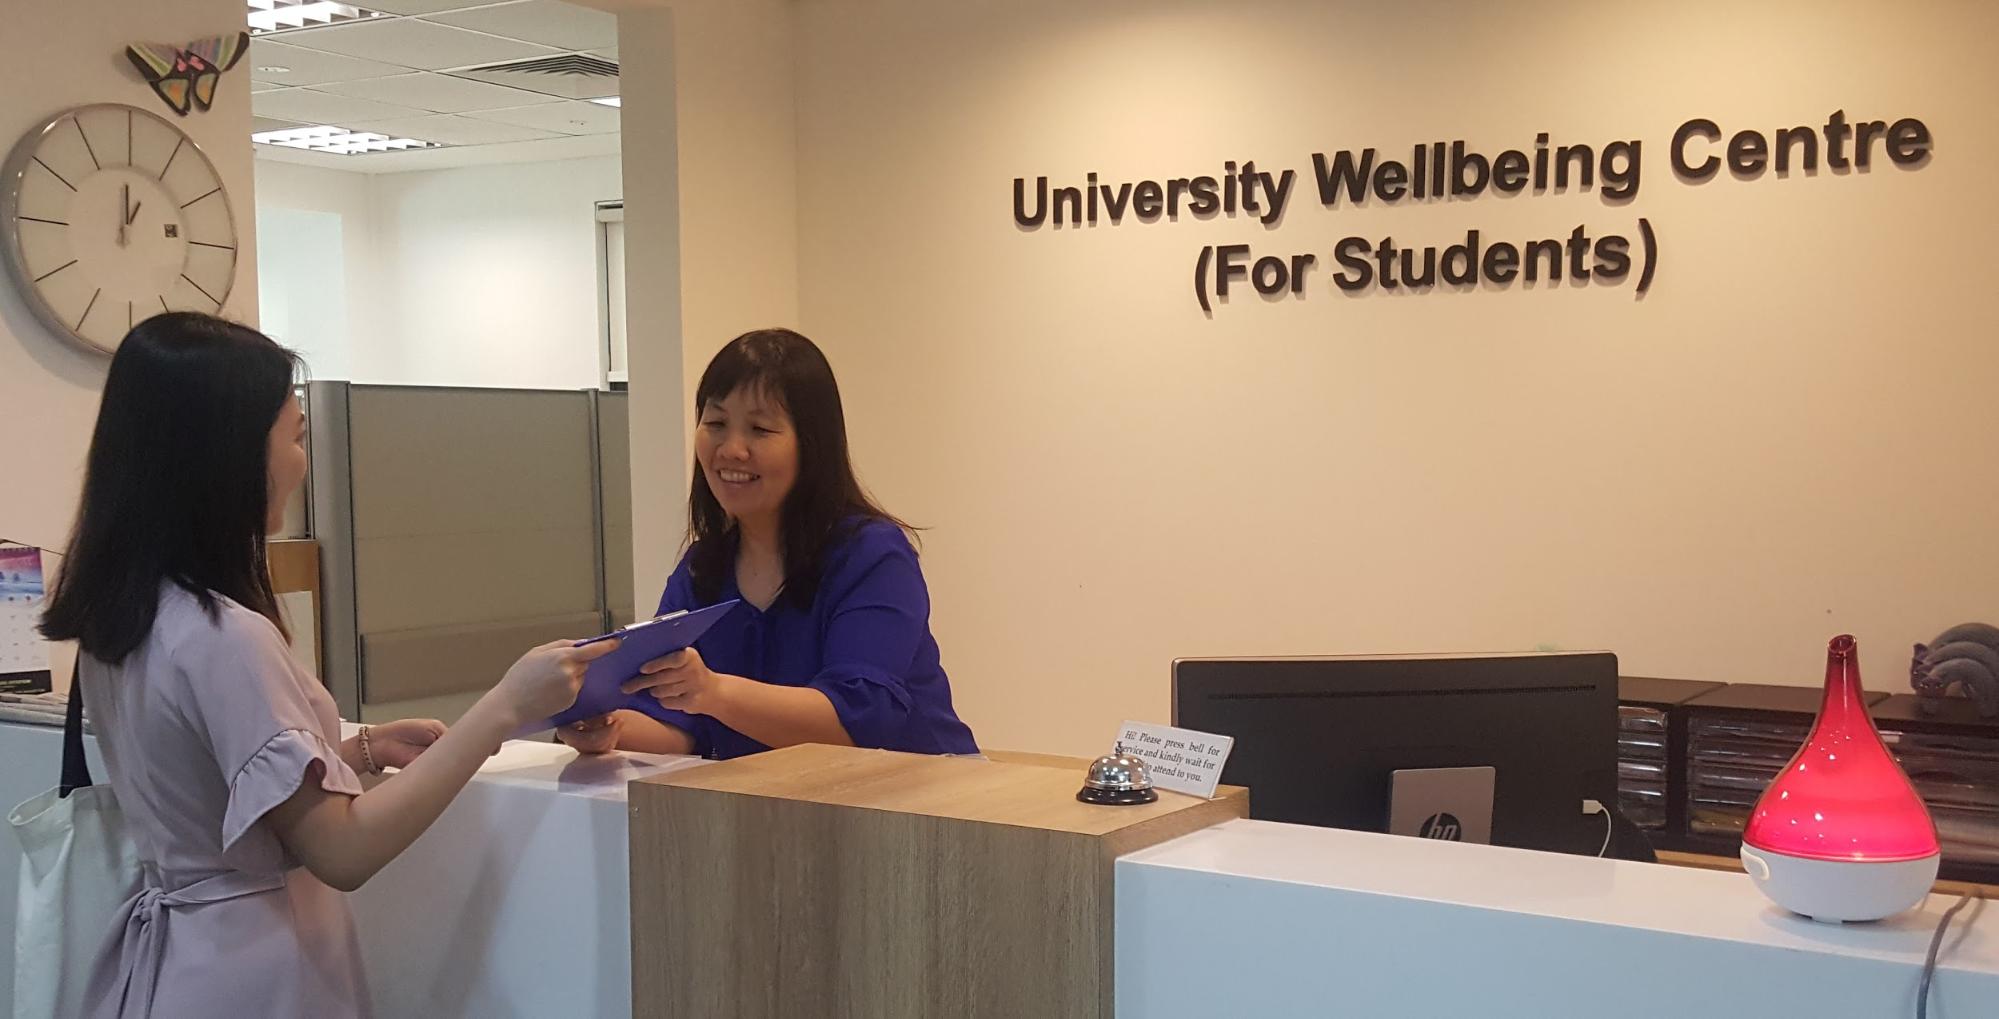 University Wellbeing Centre At Nanyang Technological University